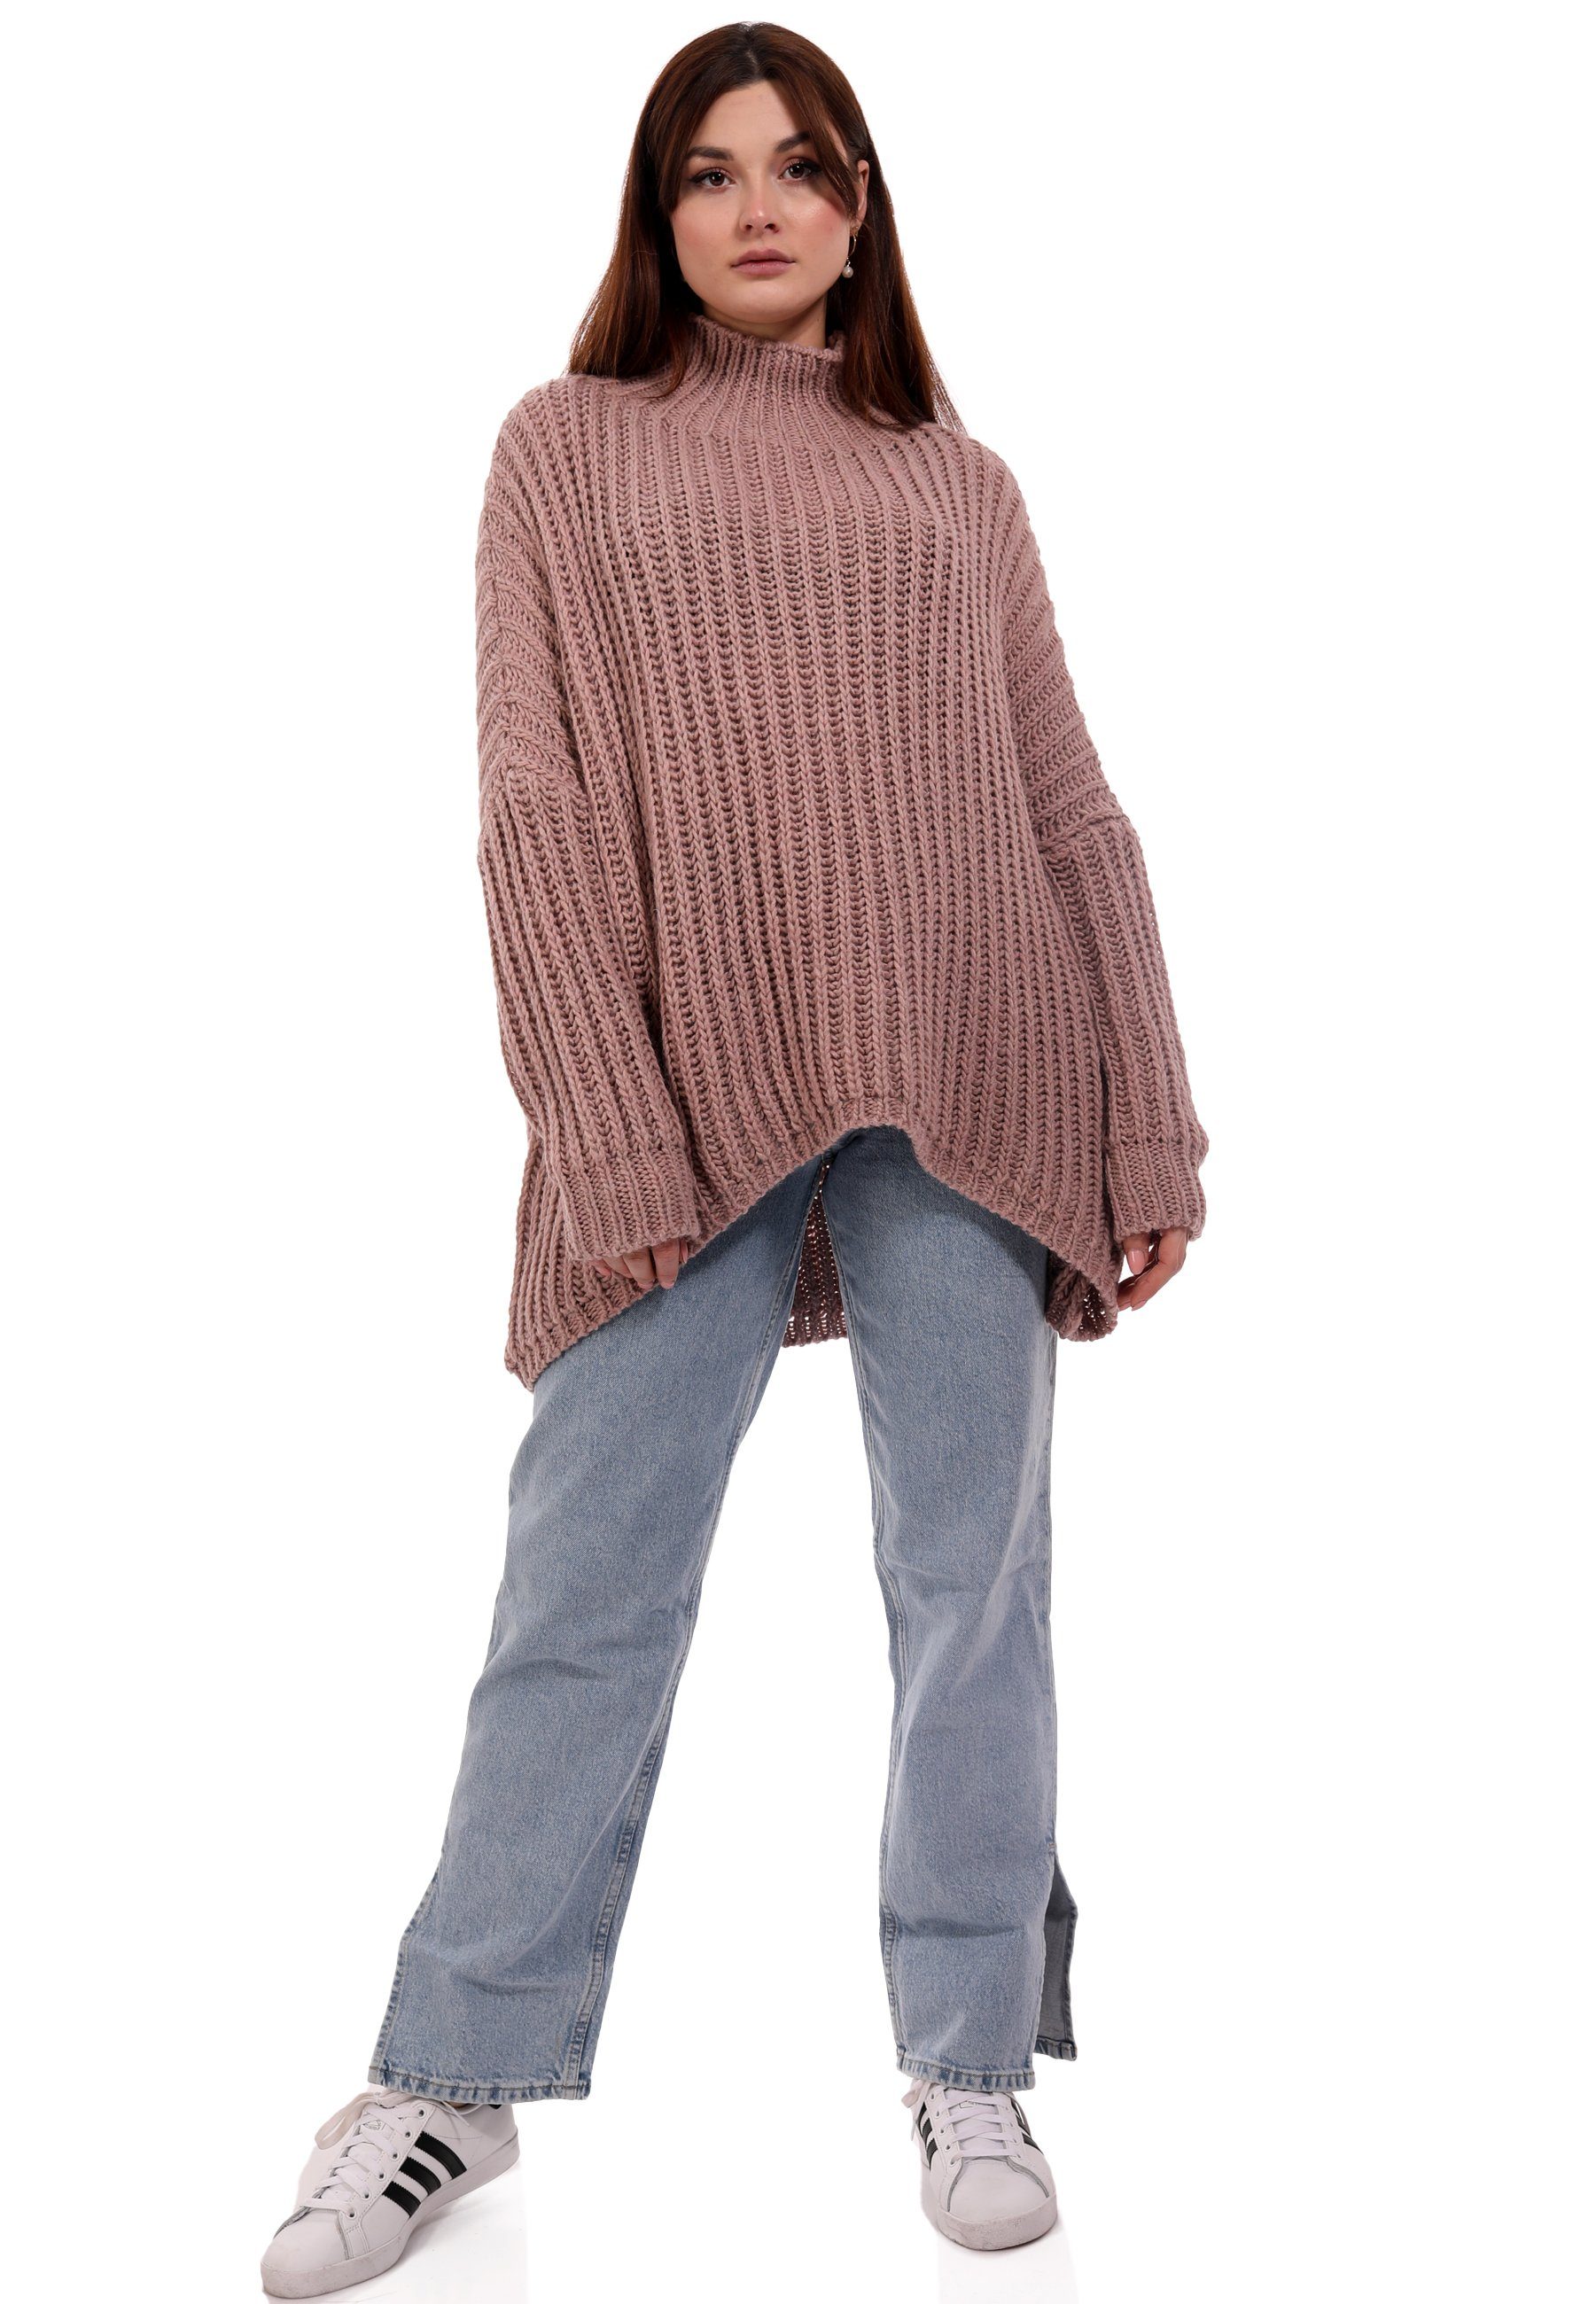 YC Fashion & Style Longpullover altrosa (1-tlg) casual Pullover Oversized Vokuhila Sweater One Size Grobstrick